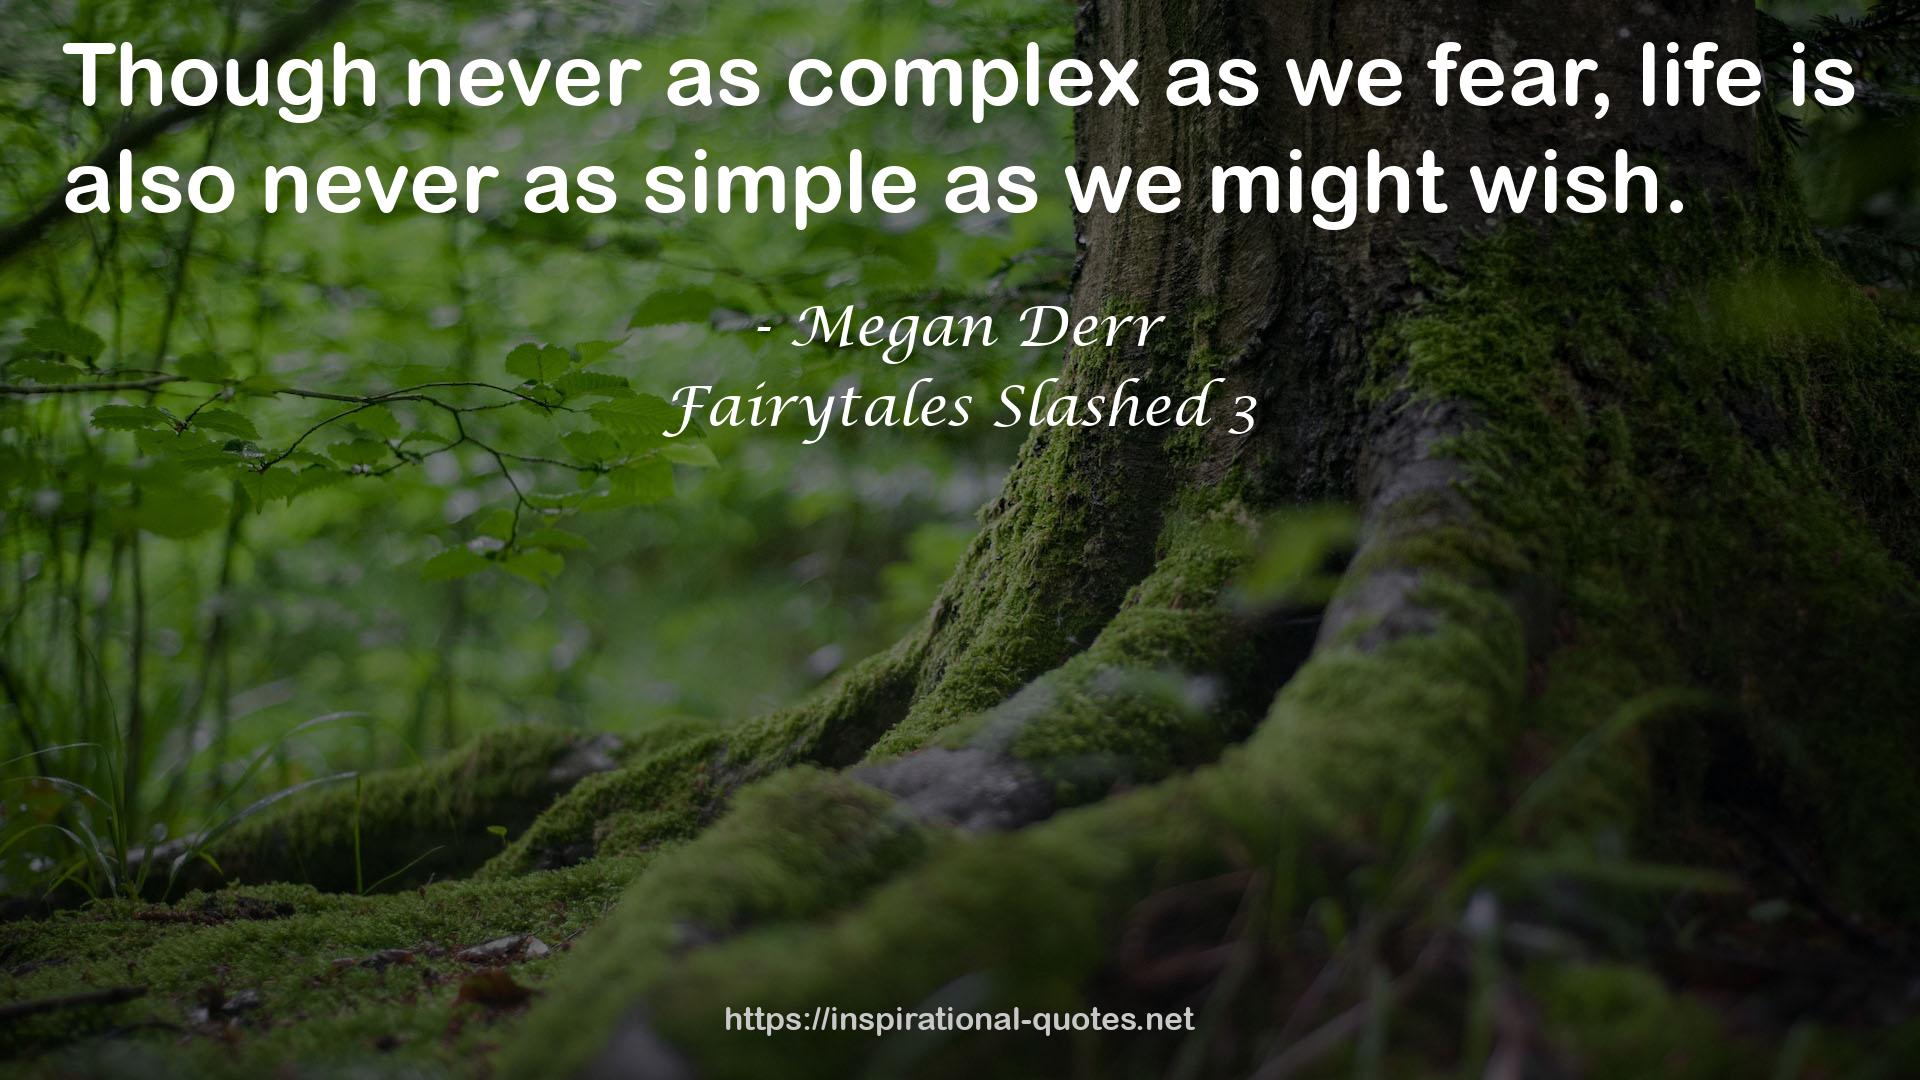 Fairytales Slashed 3 QUOTES